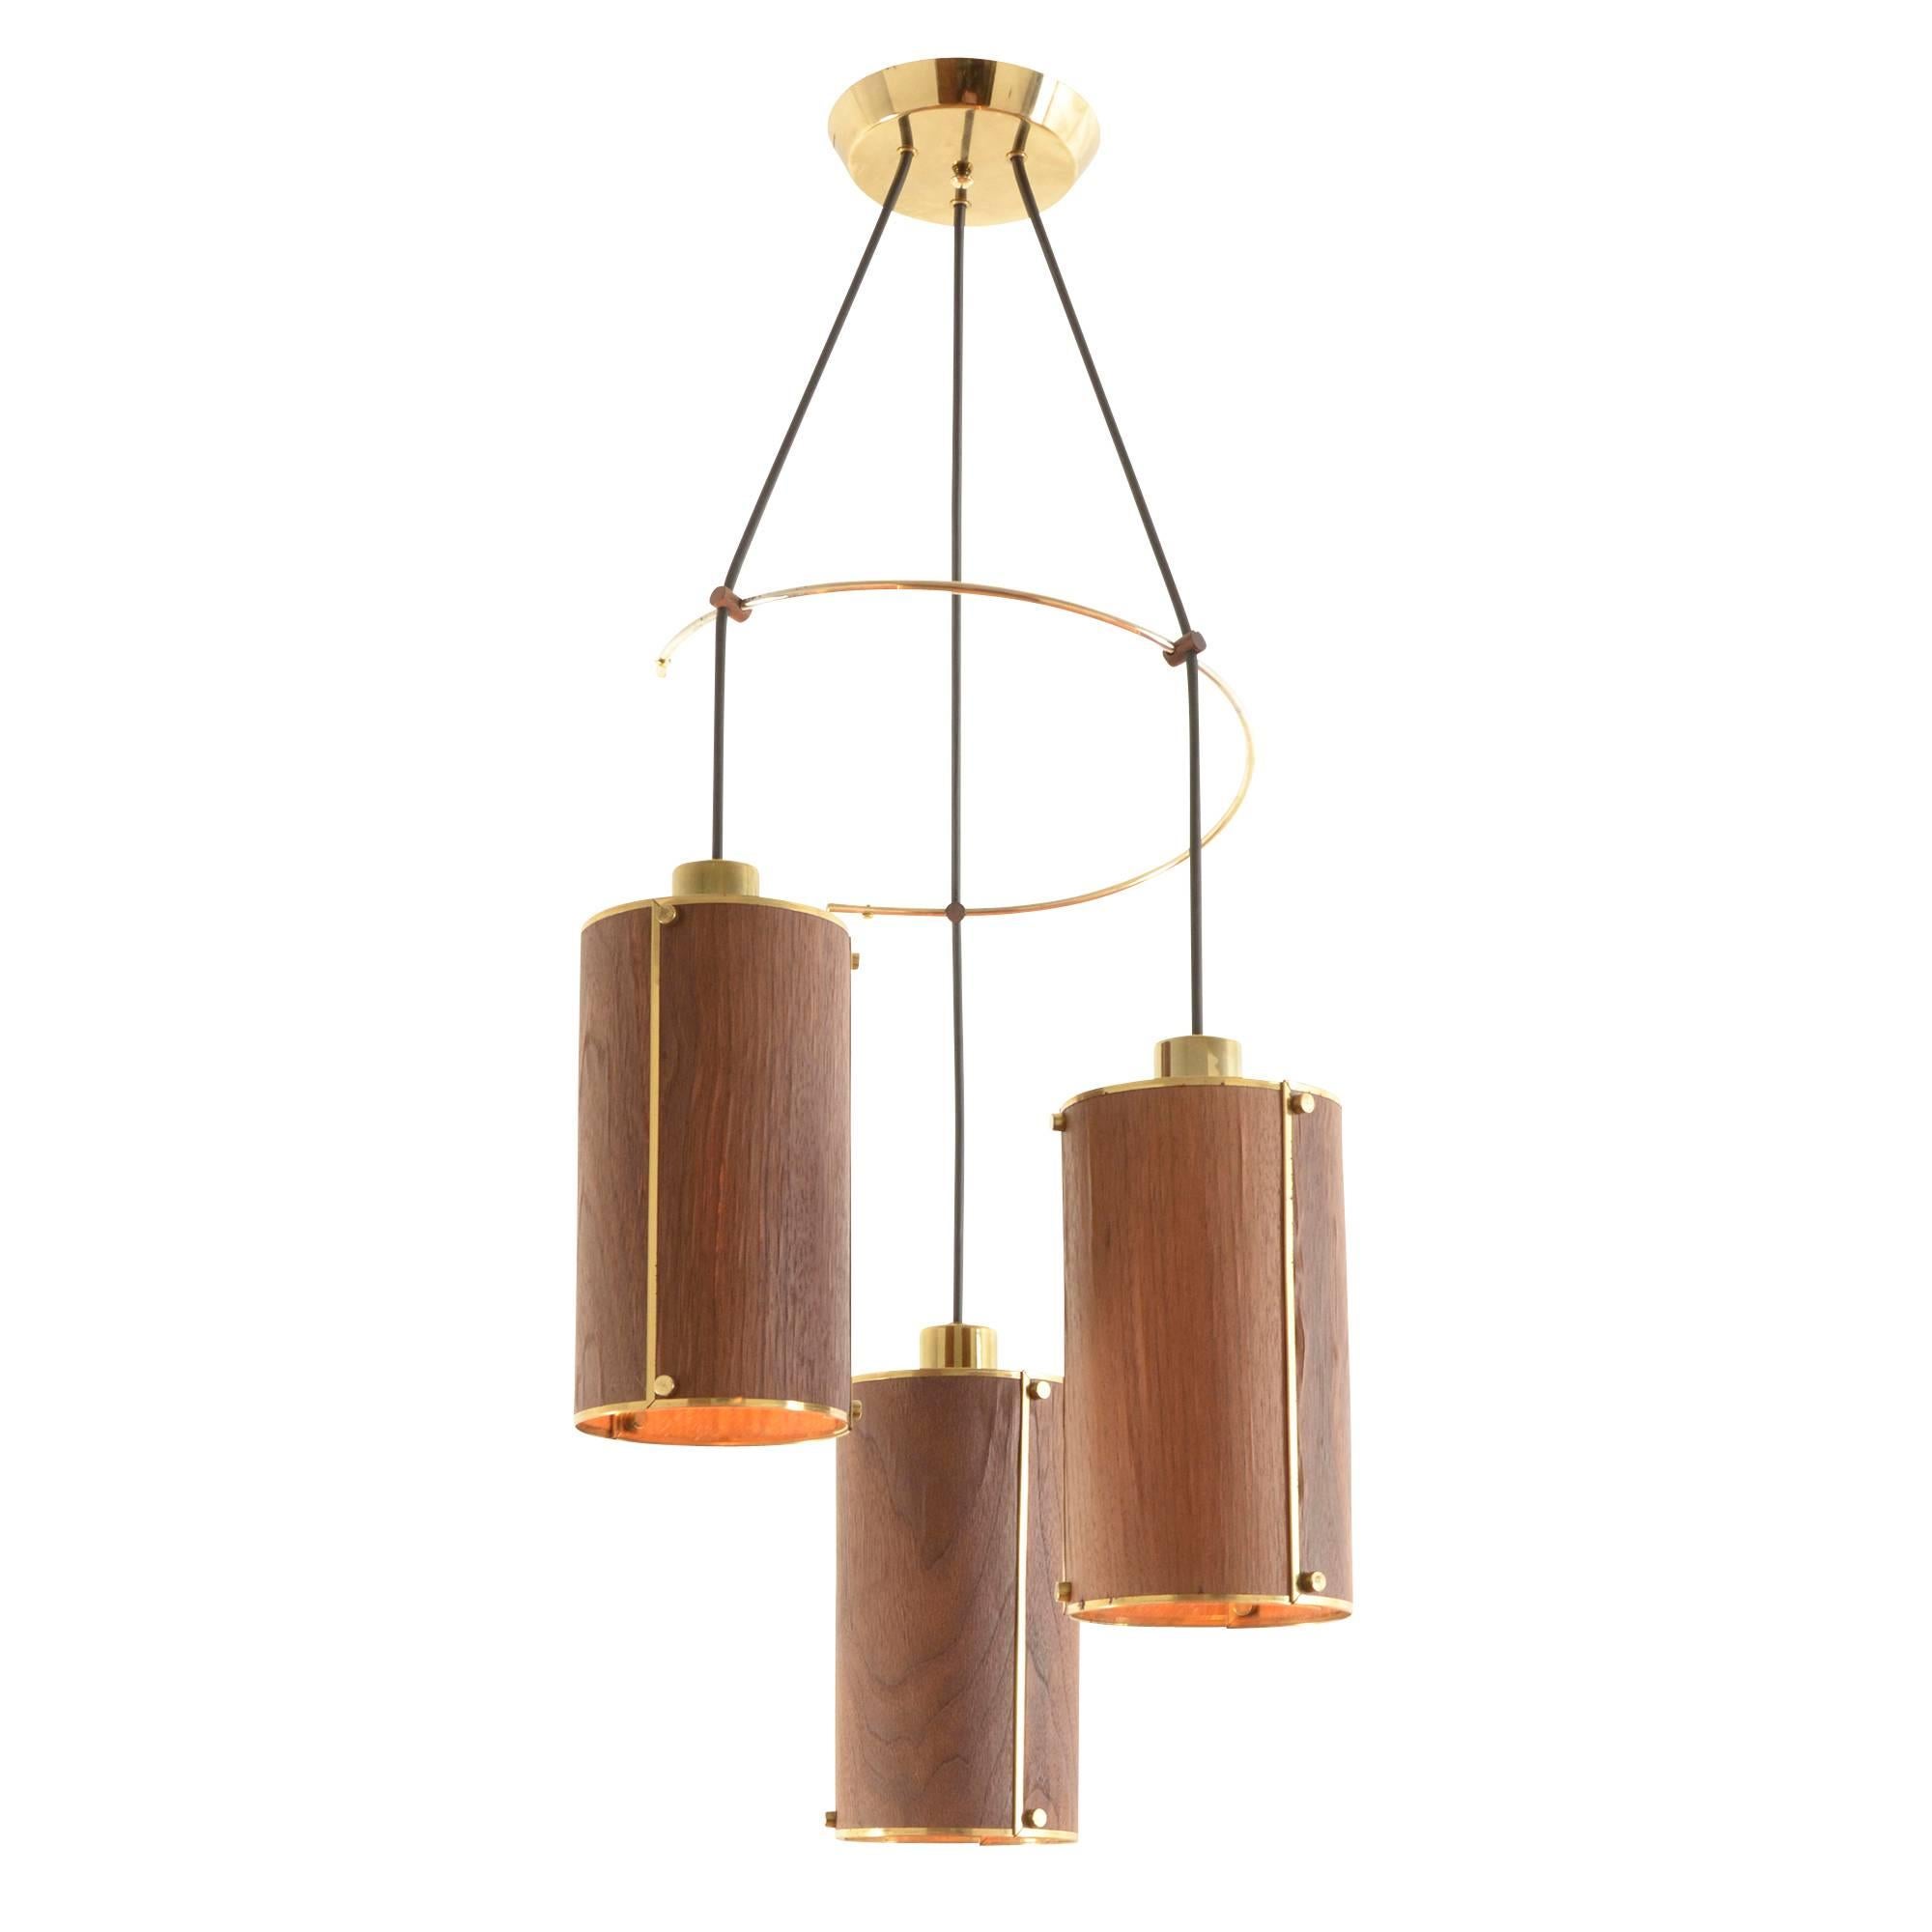 This chandelier is a fine example of a trend within a trend. The streamlined Modernism of the 1950s and '60s branched off to include a stylized review of natural and traditional materials, combining them with innovative (and often experimental)